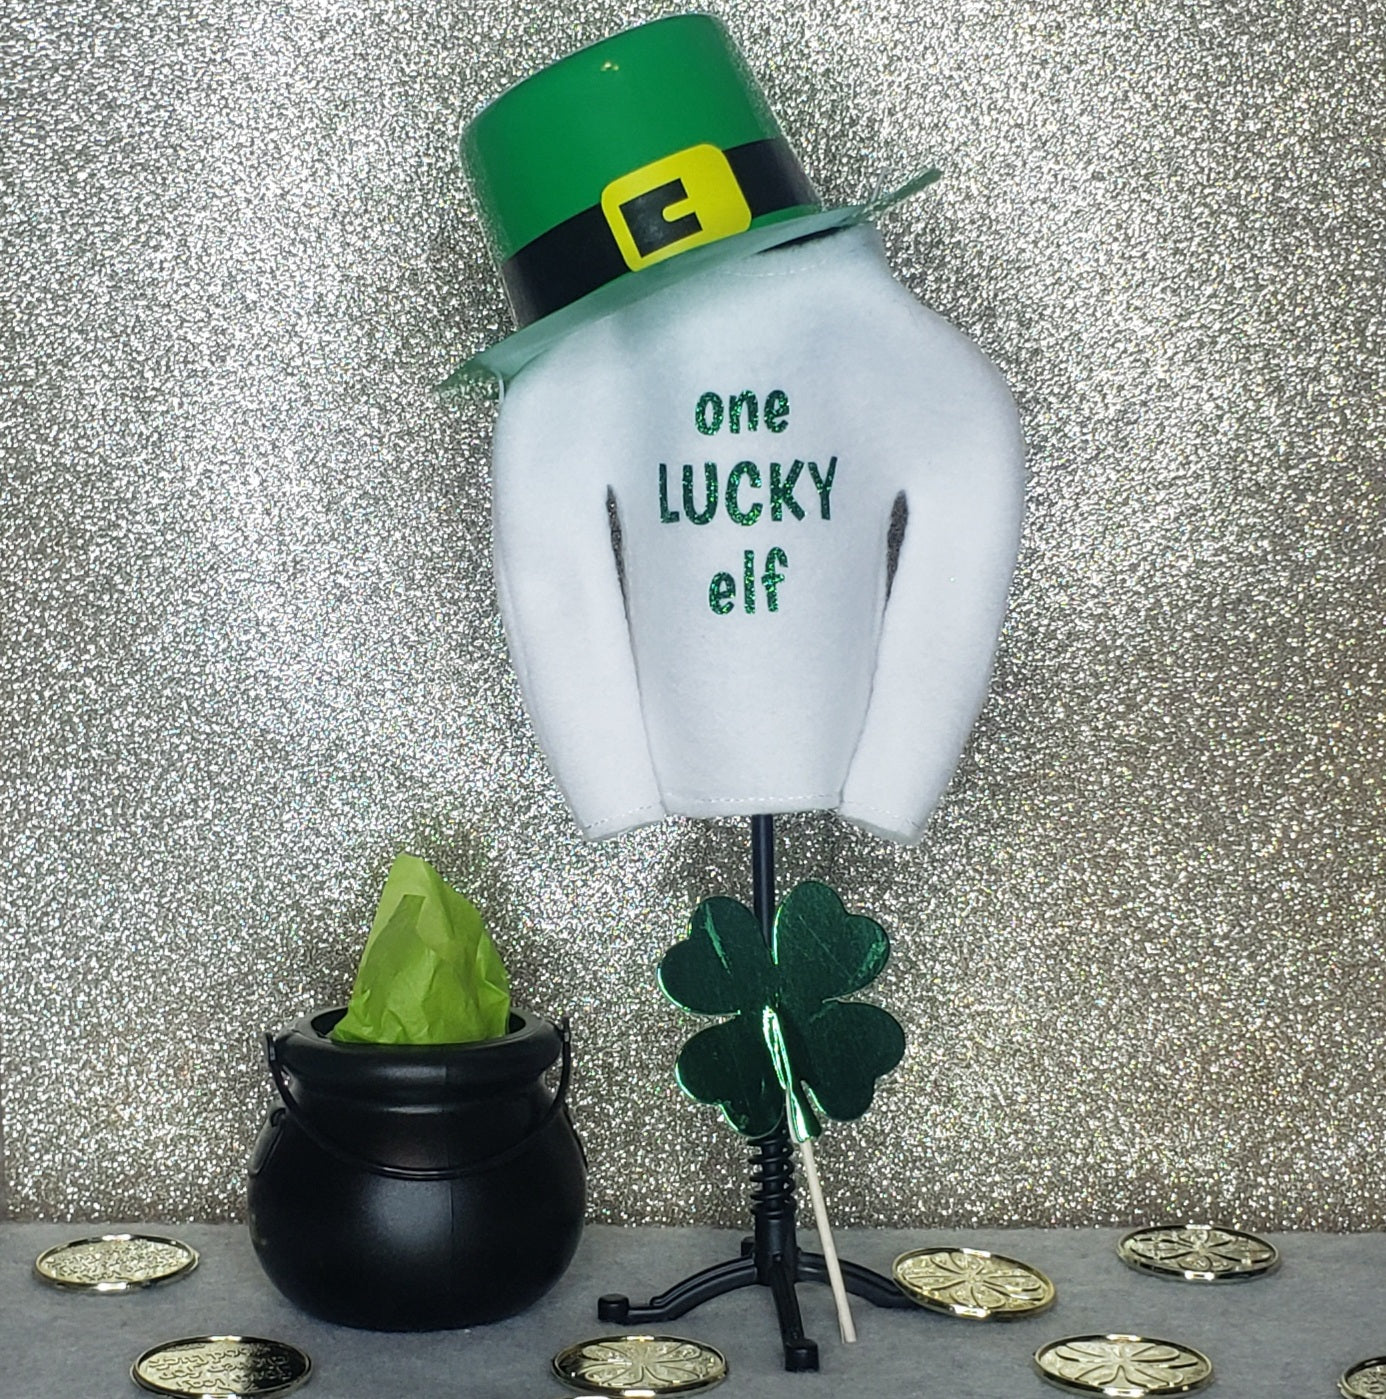 Holiday Elf - St. Patrick's Day elf shirts / jersey & accessories